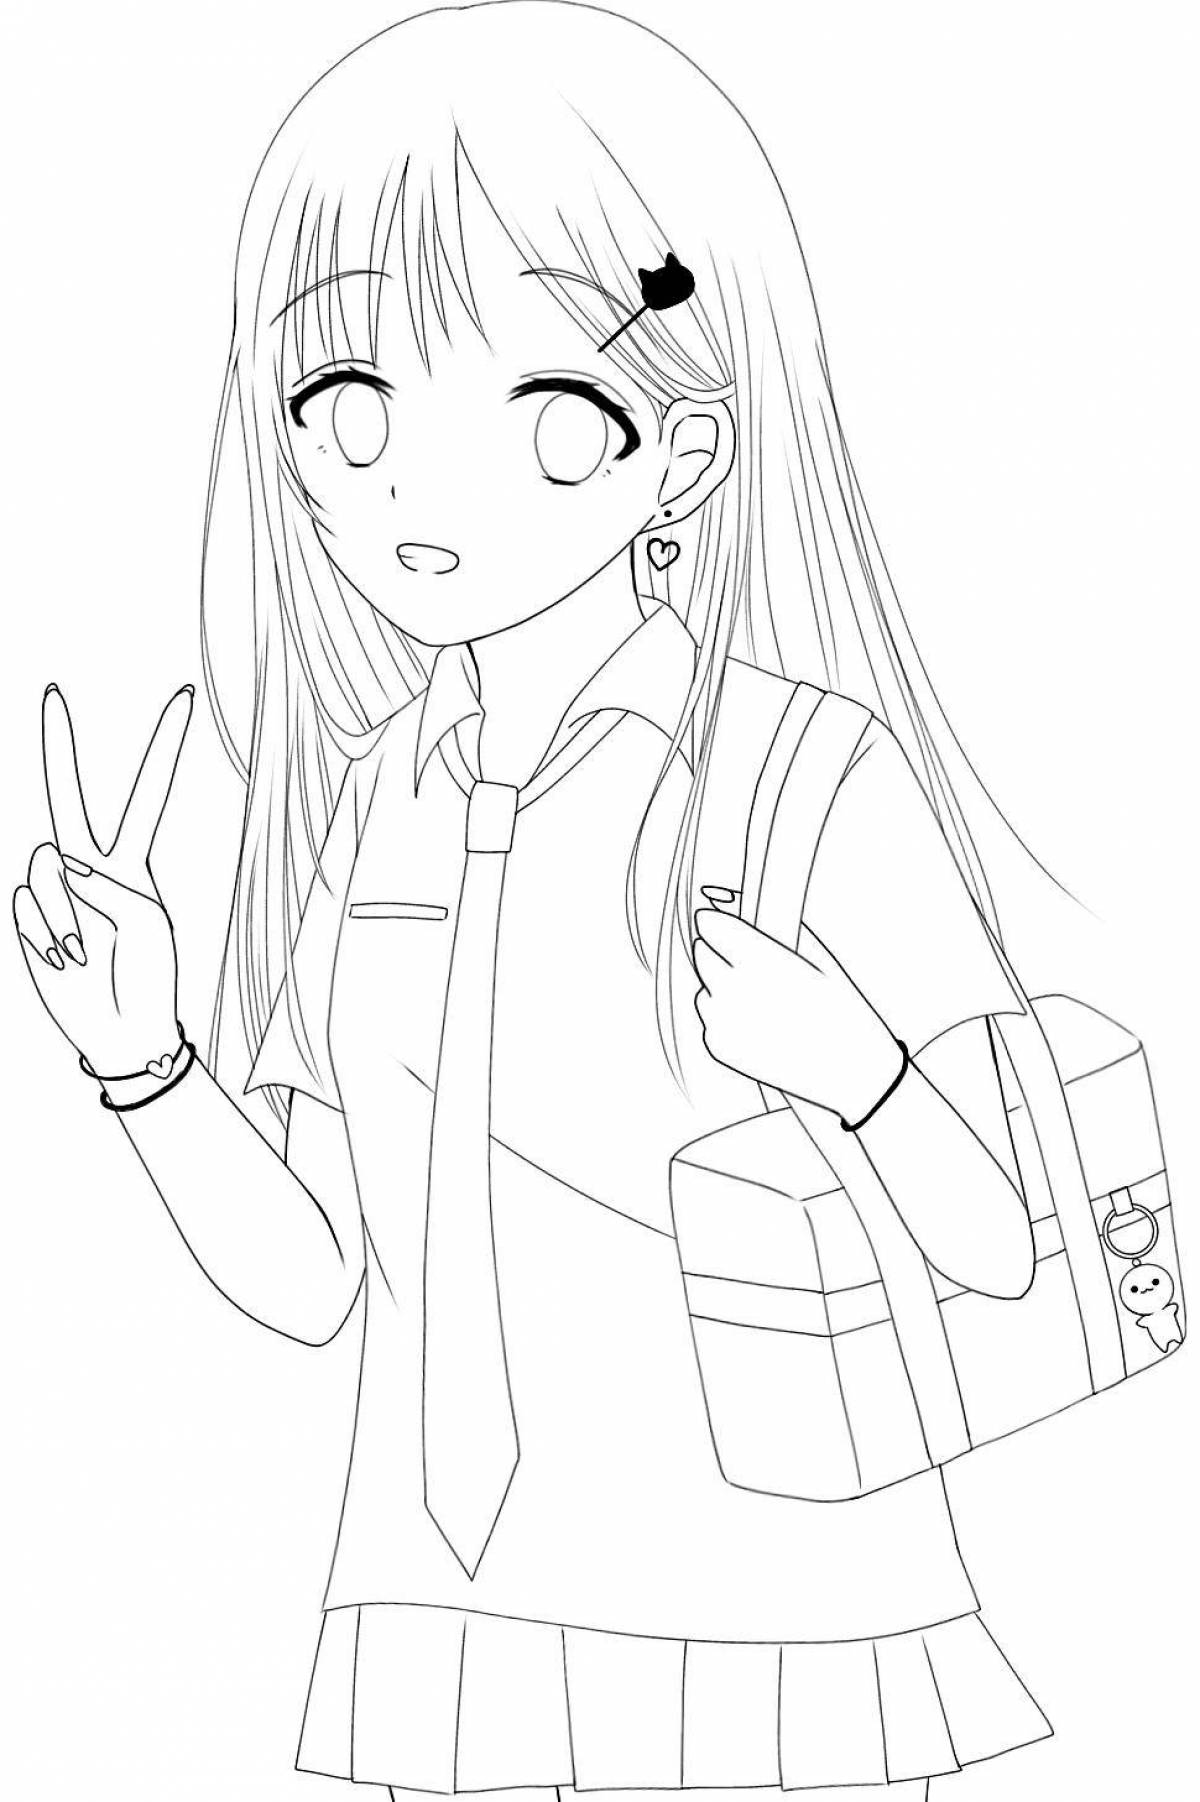 Colorful ibispaint coloring page